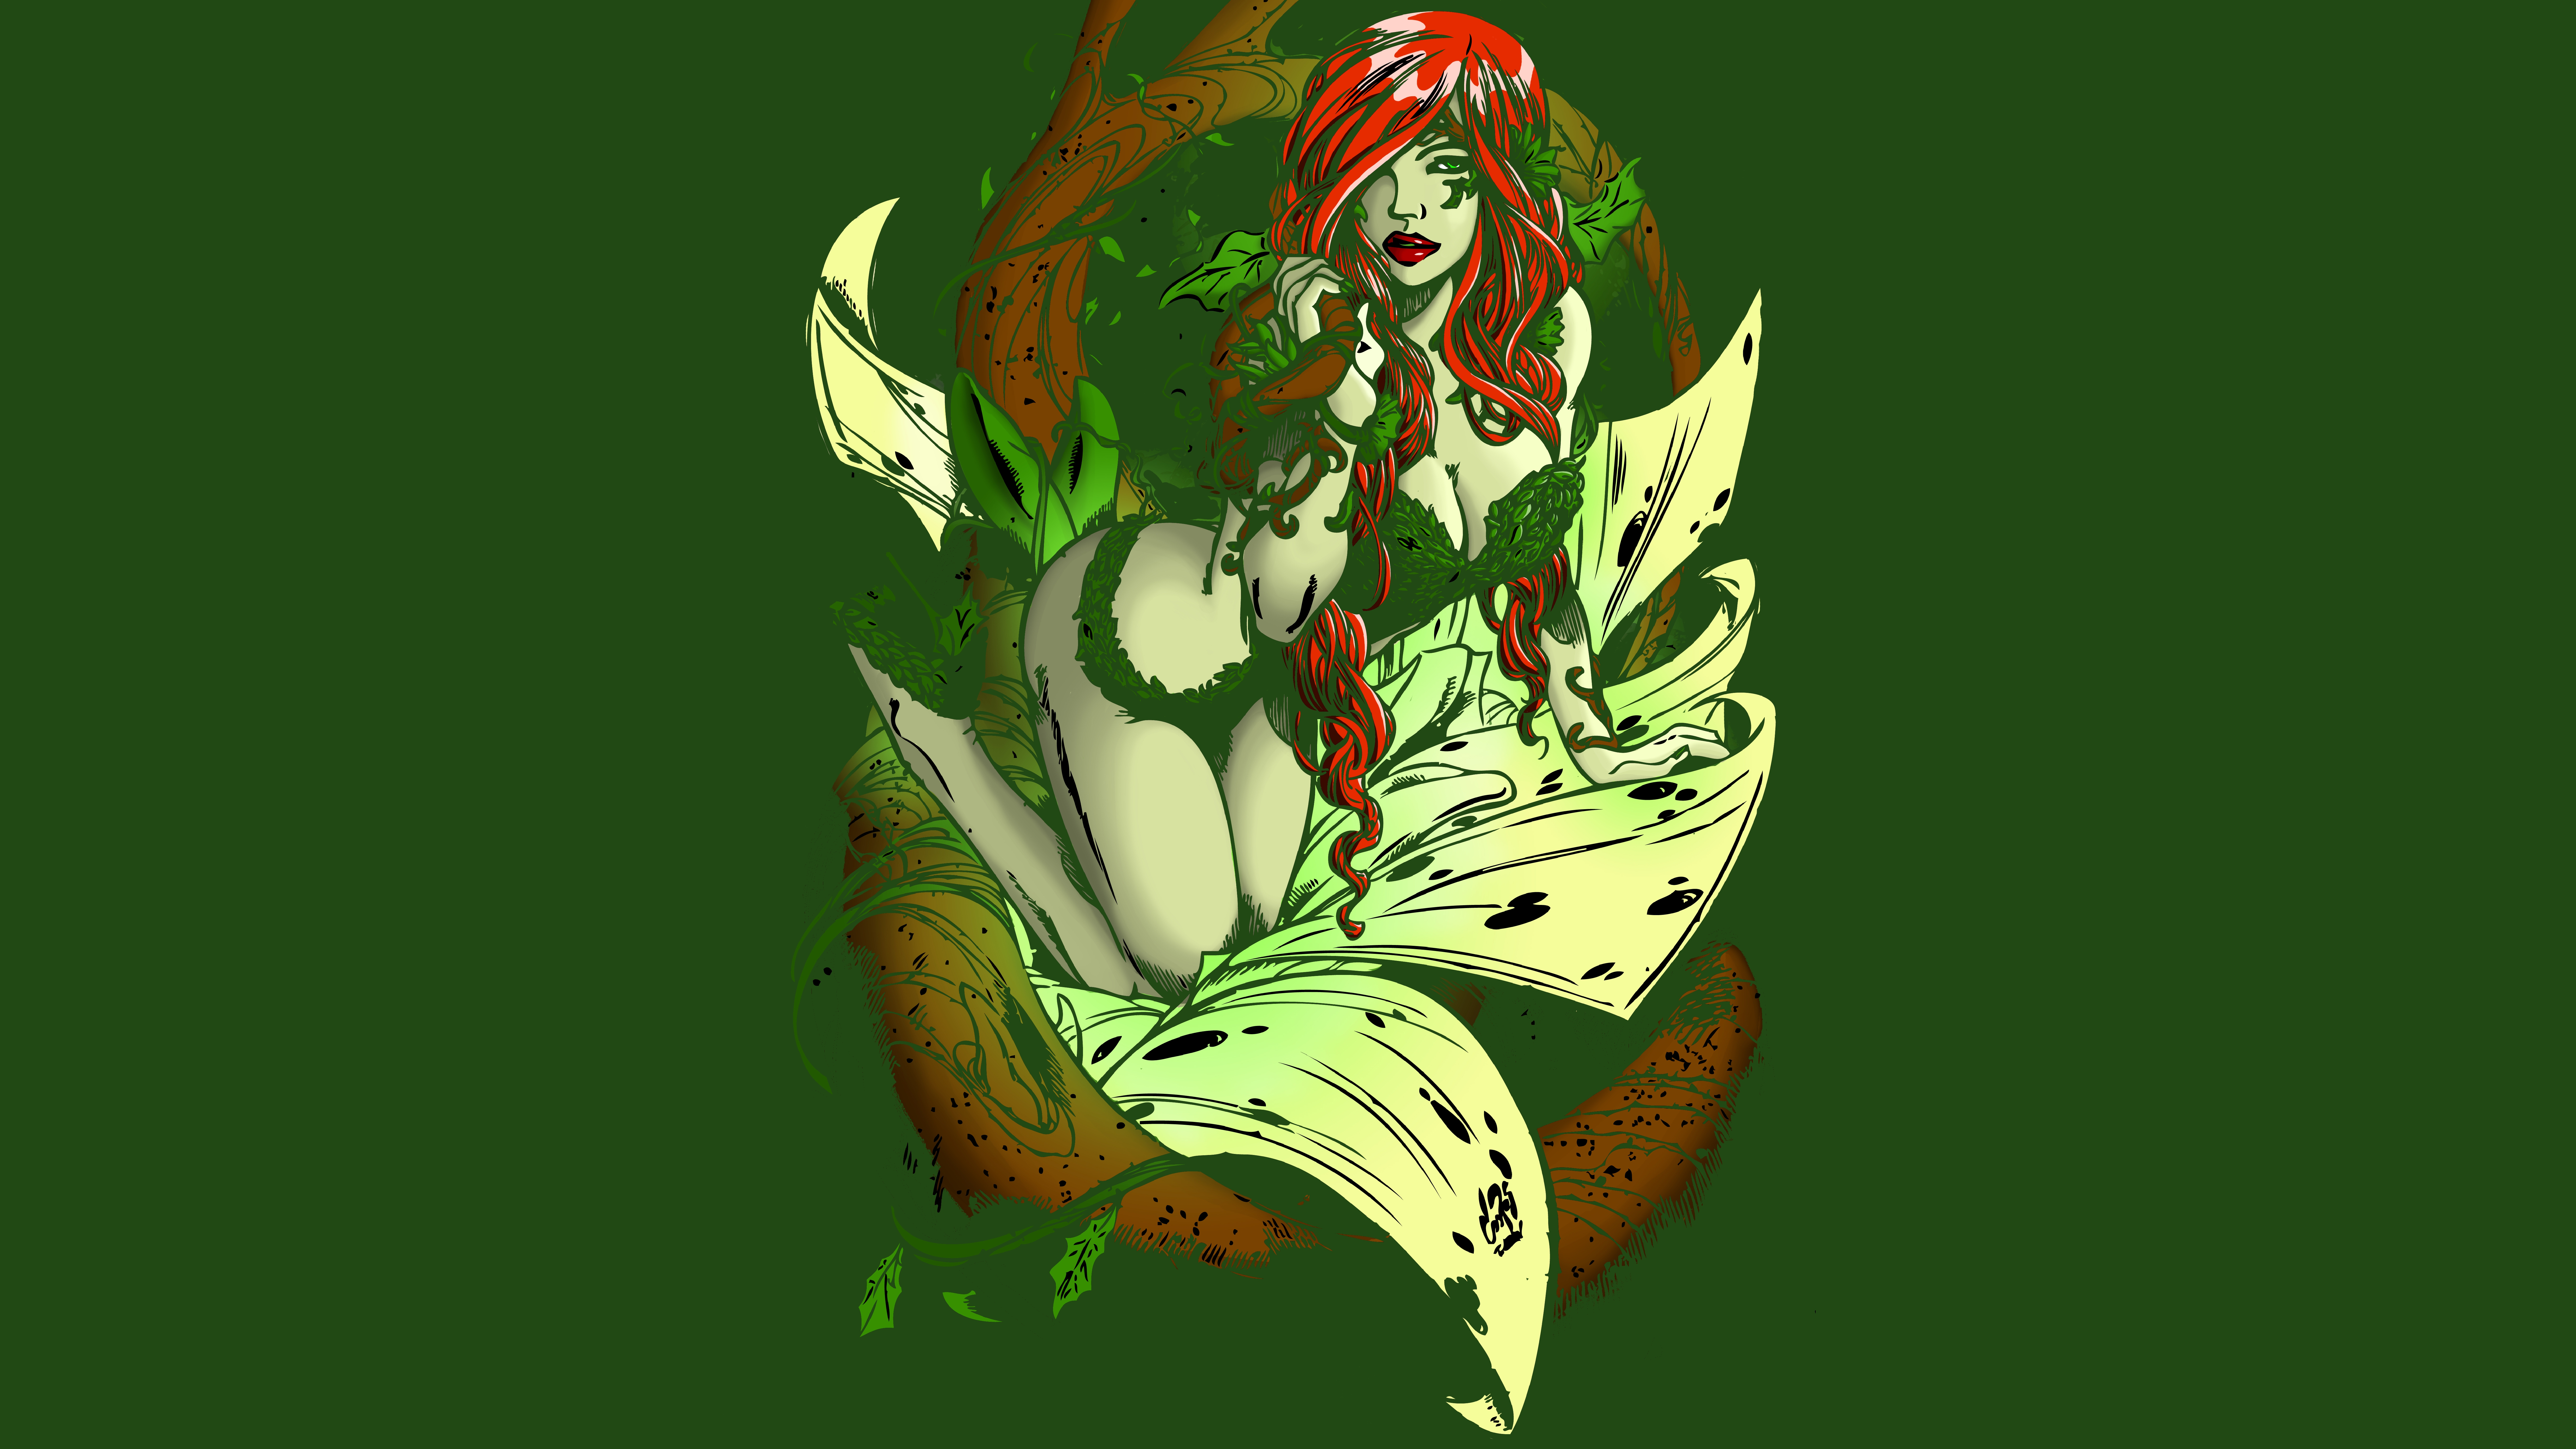 Poison Ivy Wallpapers Pictures Images HD Wallpapers Download Free Images Wallpaper [wallpaper981.blogspot.com]